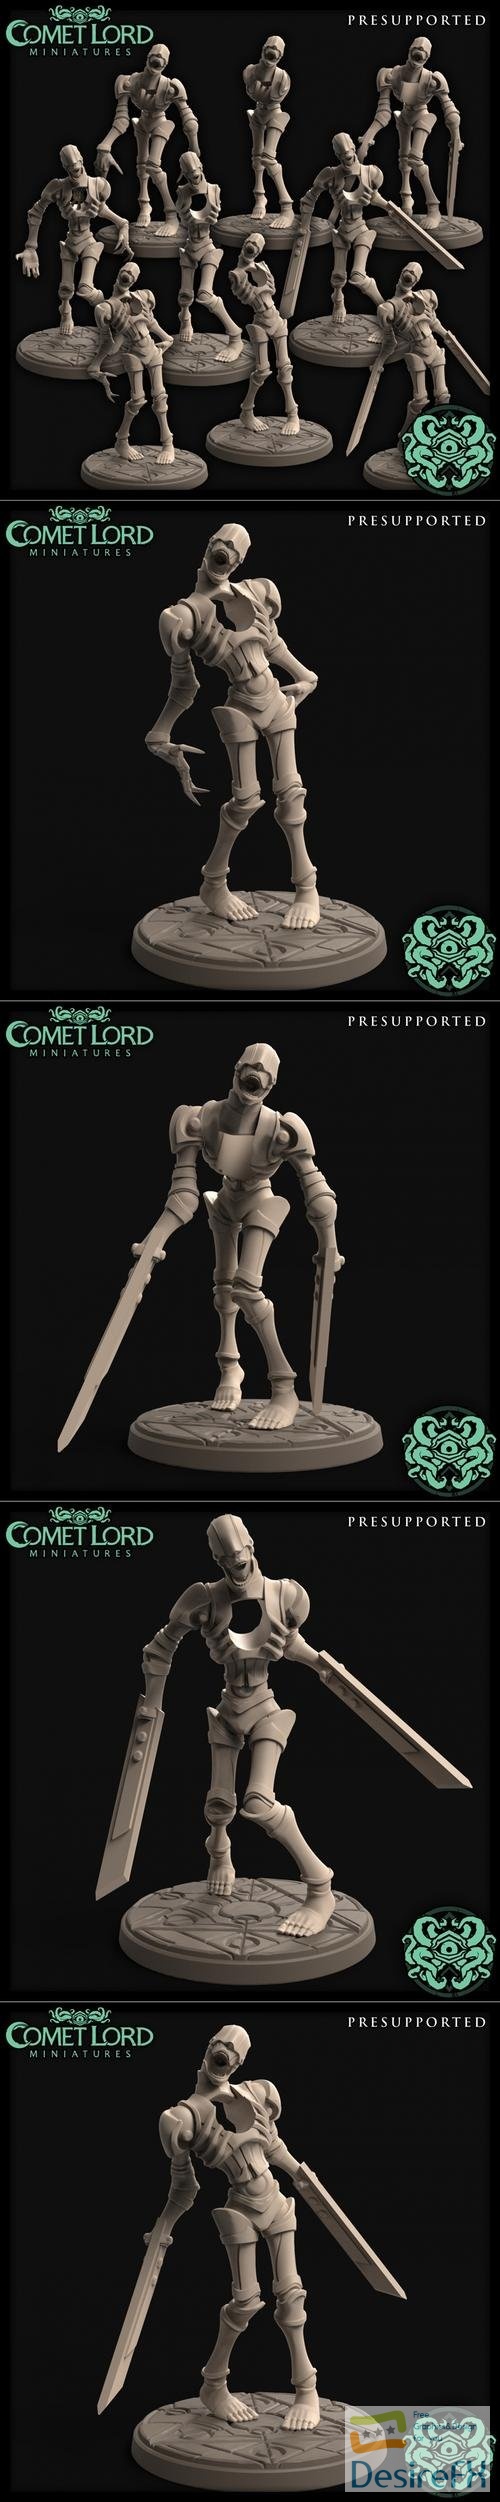 Comet Lord Miniatures - Mannequin Constructs – 3D Print